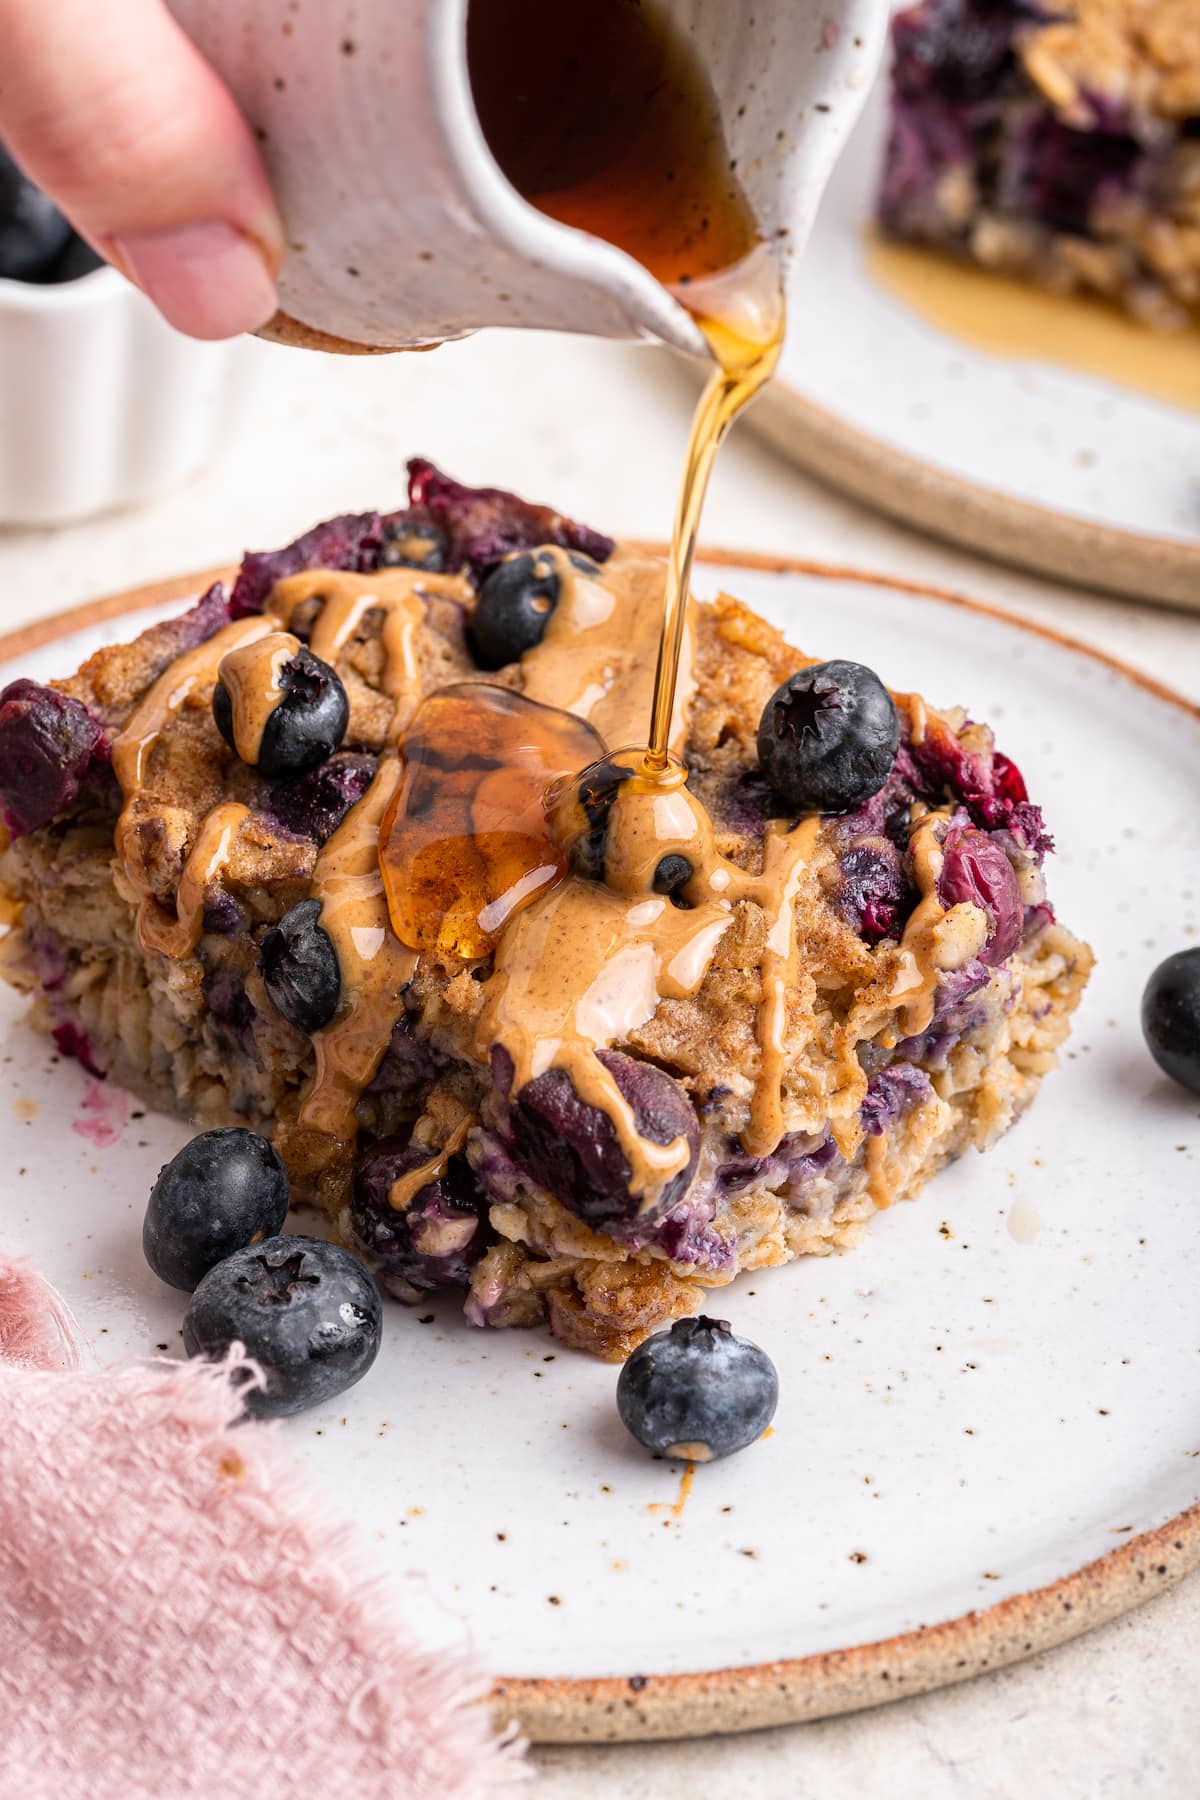 Maple syrup is being poured over a serving of blueberry baked oatmeal that also has a drizzle of nut butter.